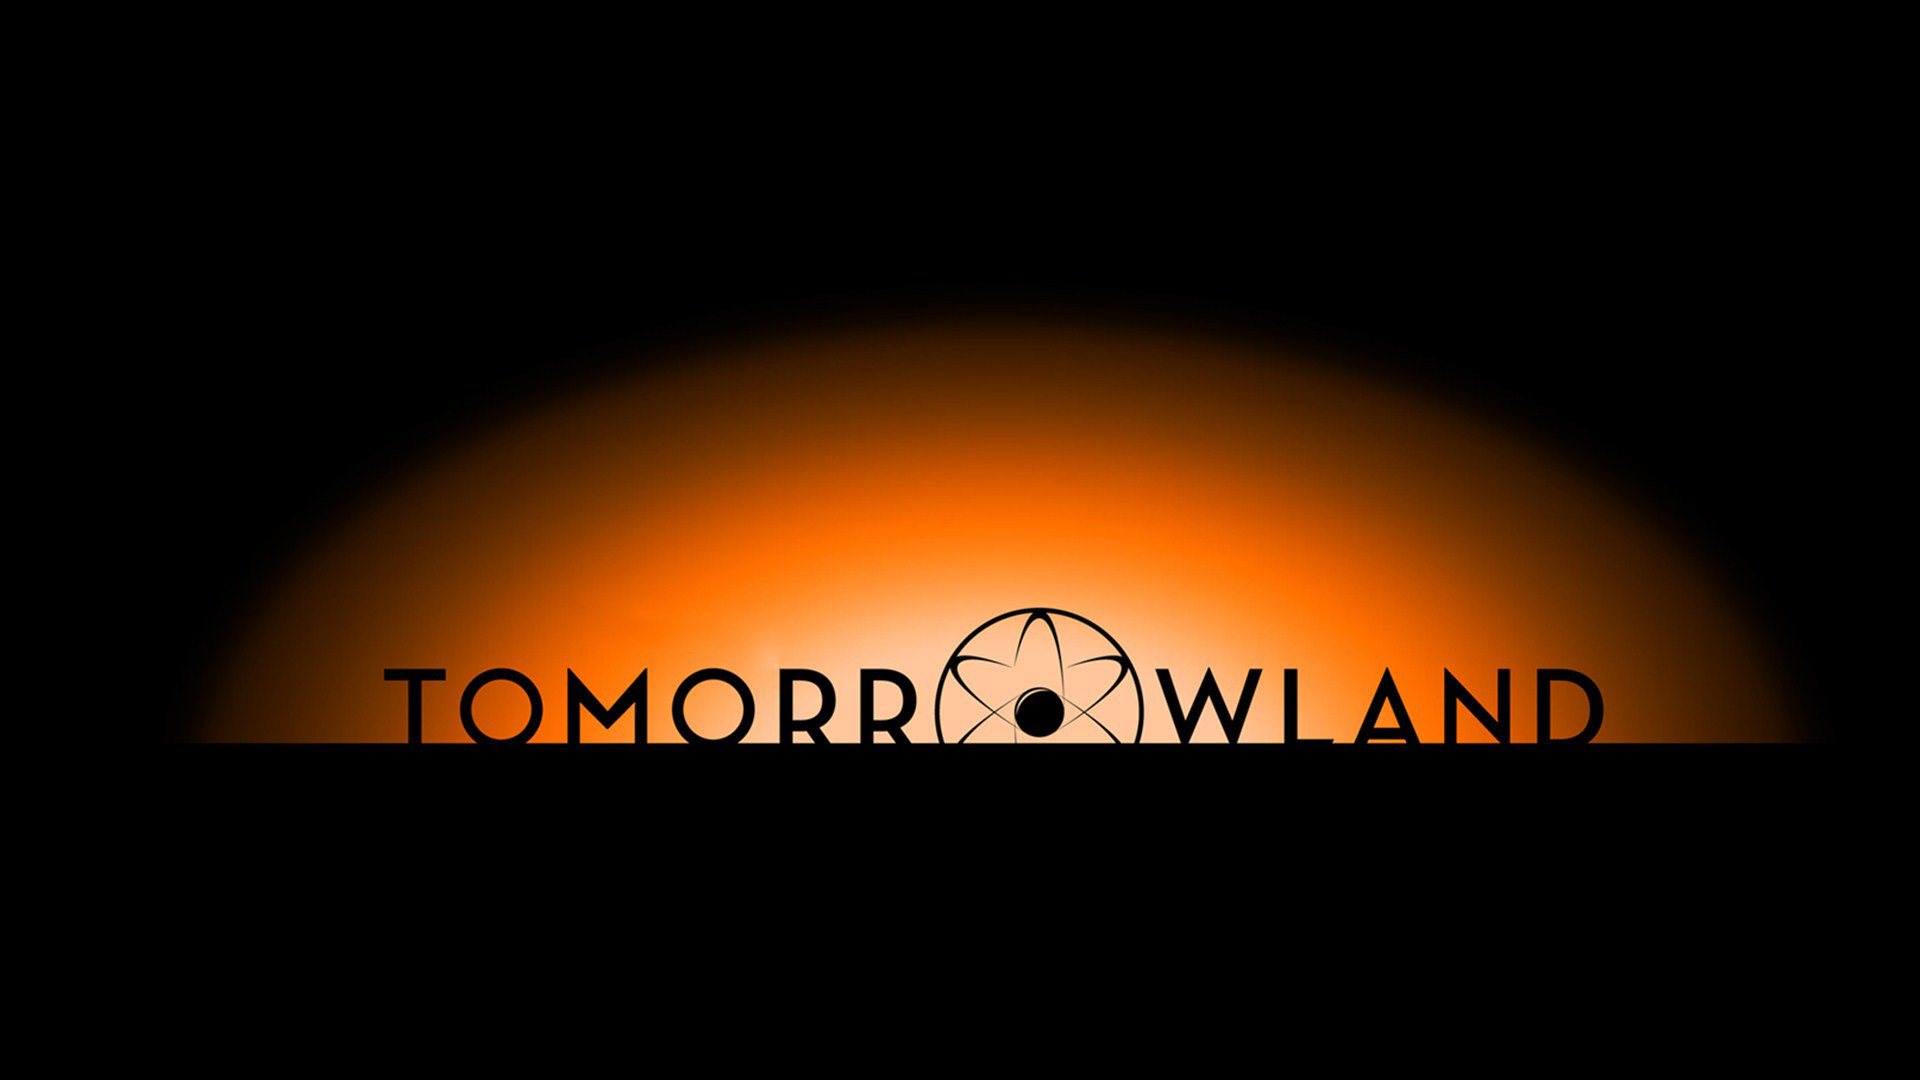 1920x1080 Tomorrowland 1080p Wallpaper http://wallpapers-and-backgrounds .net/tomorrowland